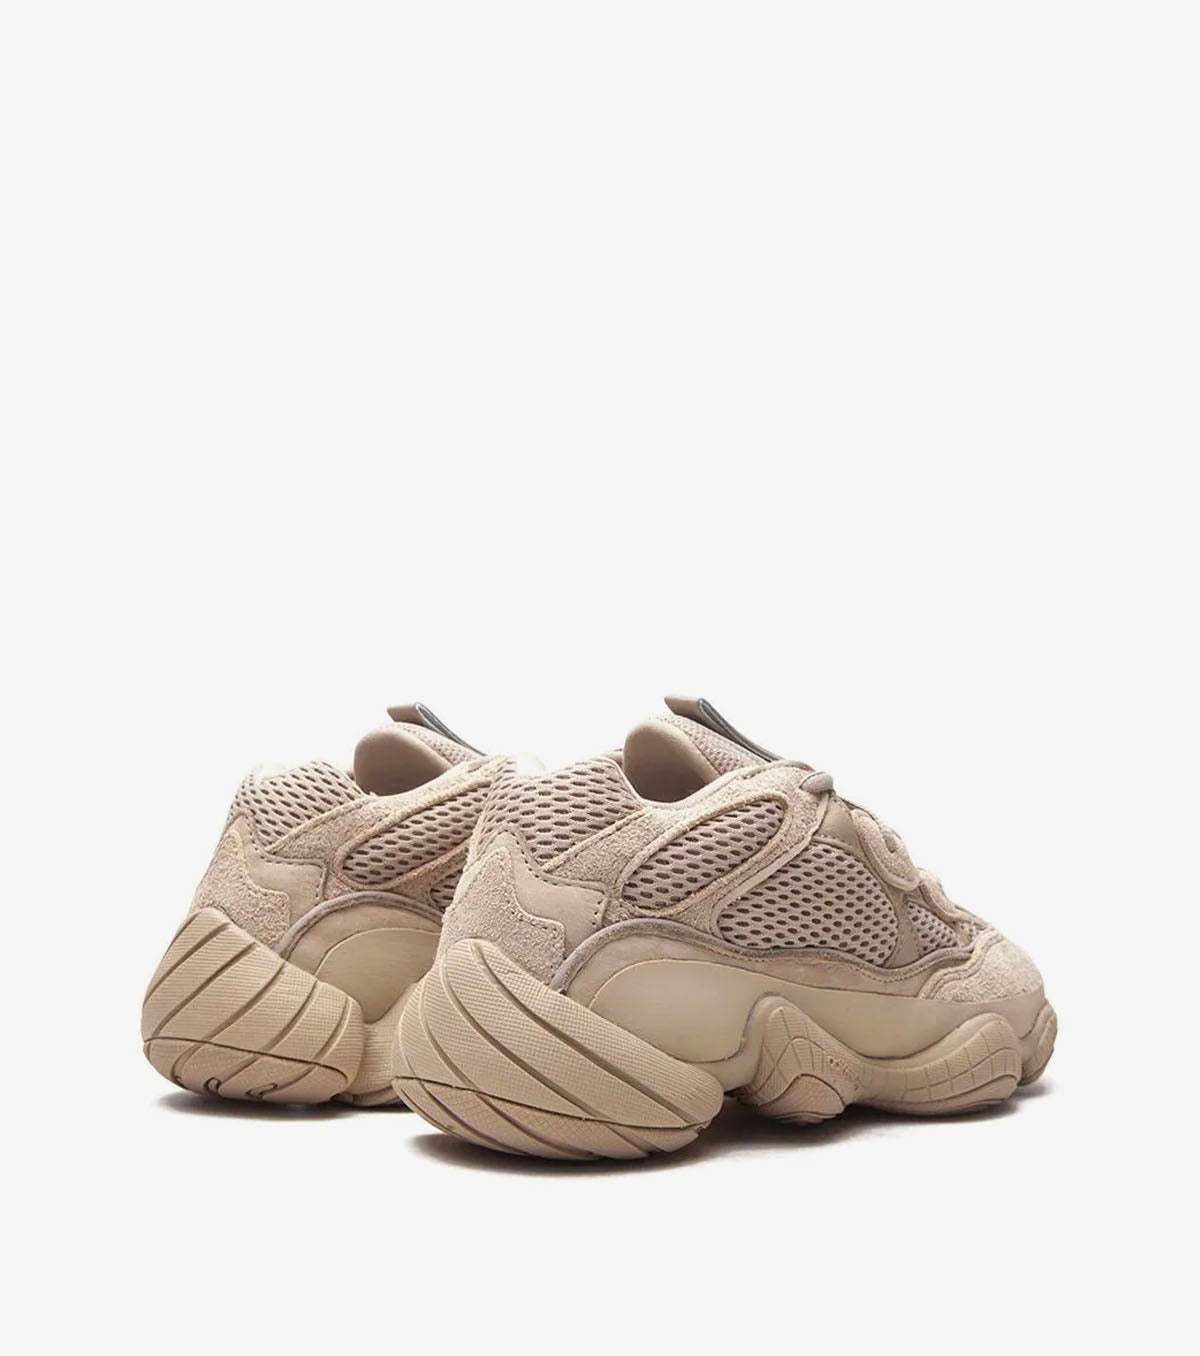 Yeezy 500 "Taupe" sneakers - SNKRBASE